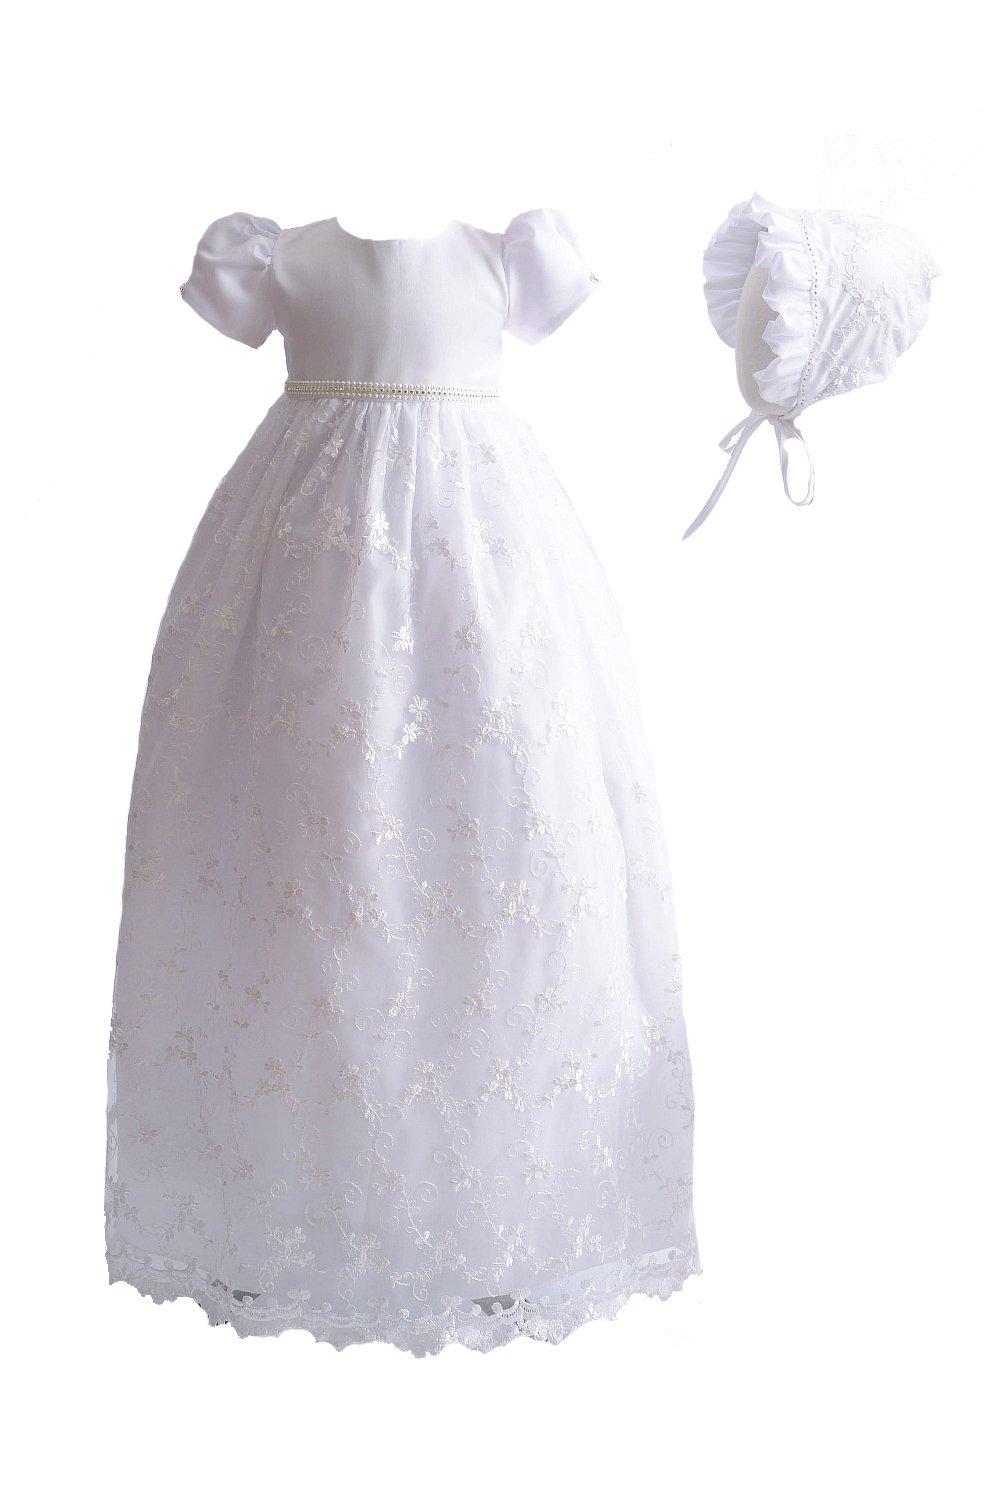 Lace Long Christening Gown with Bonnet